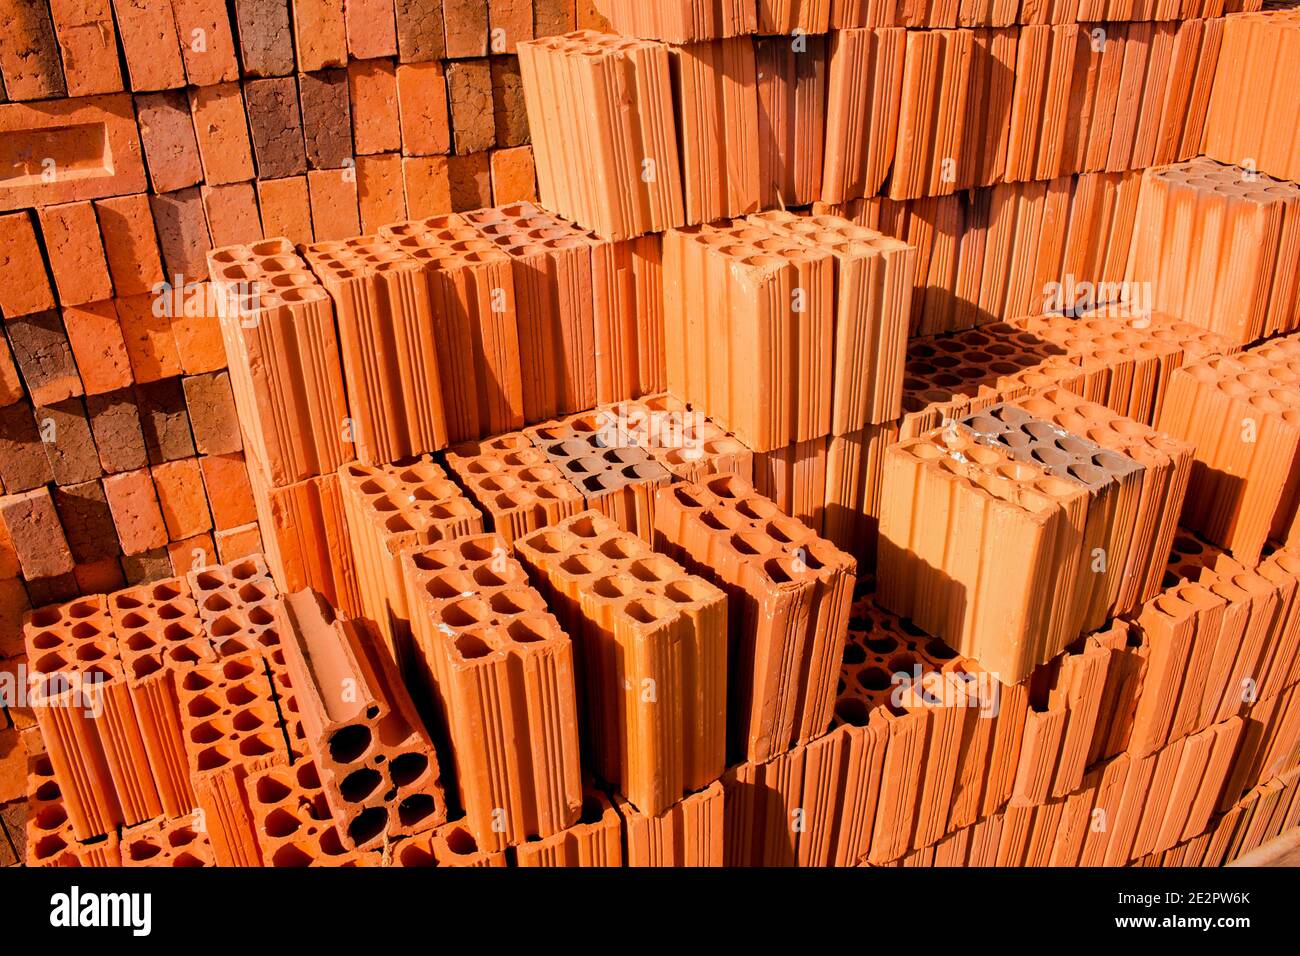 Stacks of red and brown clay bricks and blocks for general construction and reform Stock Photo